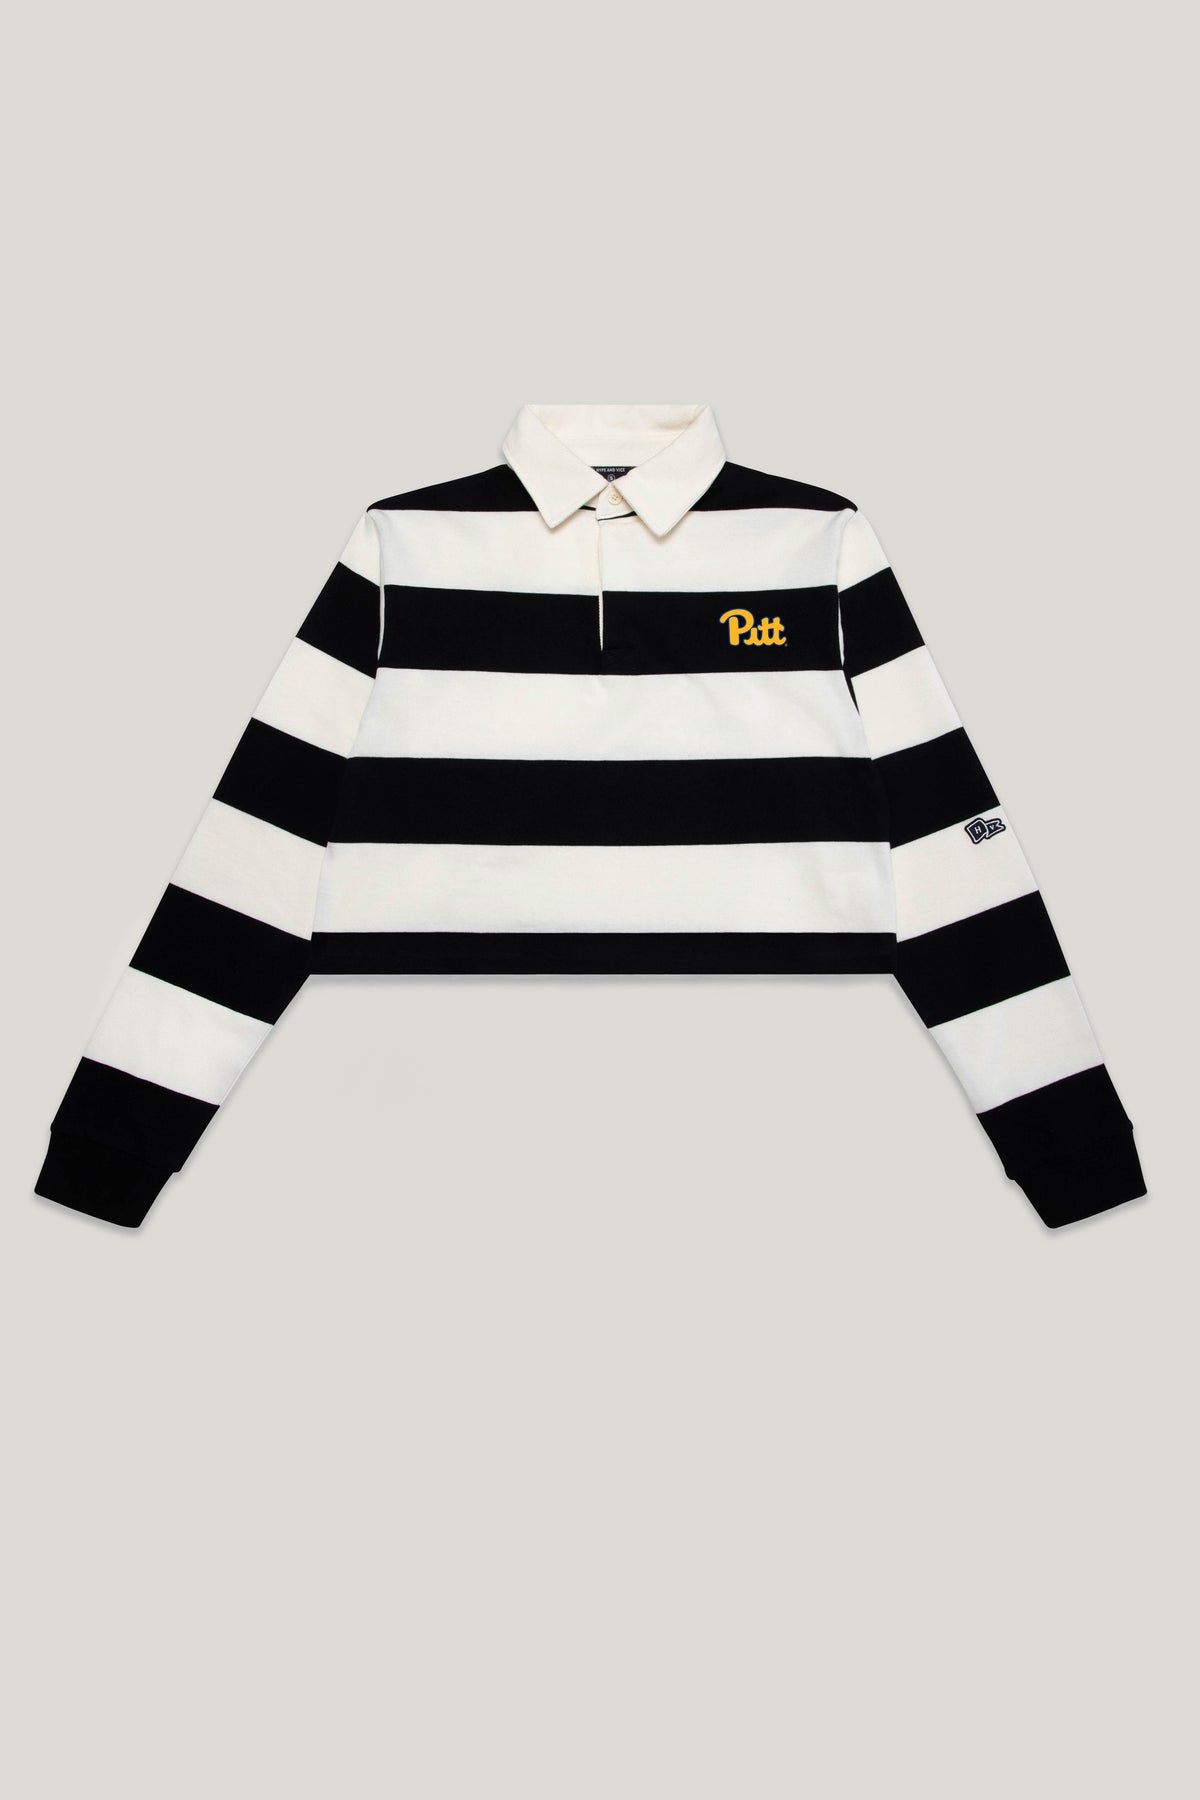 Pittsburgh Rugby Top